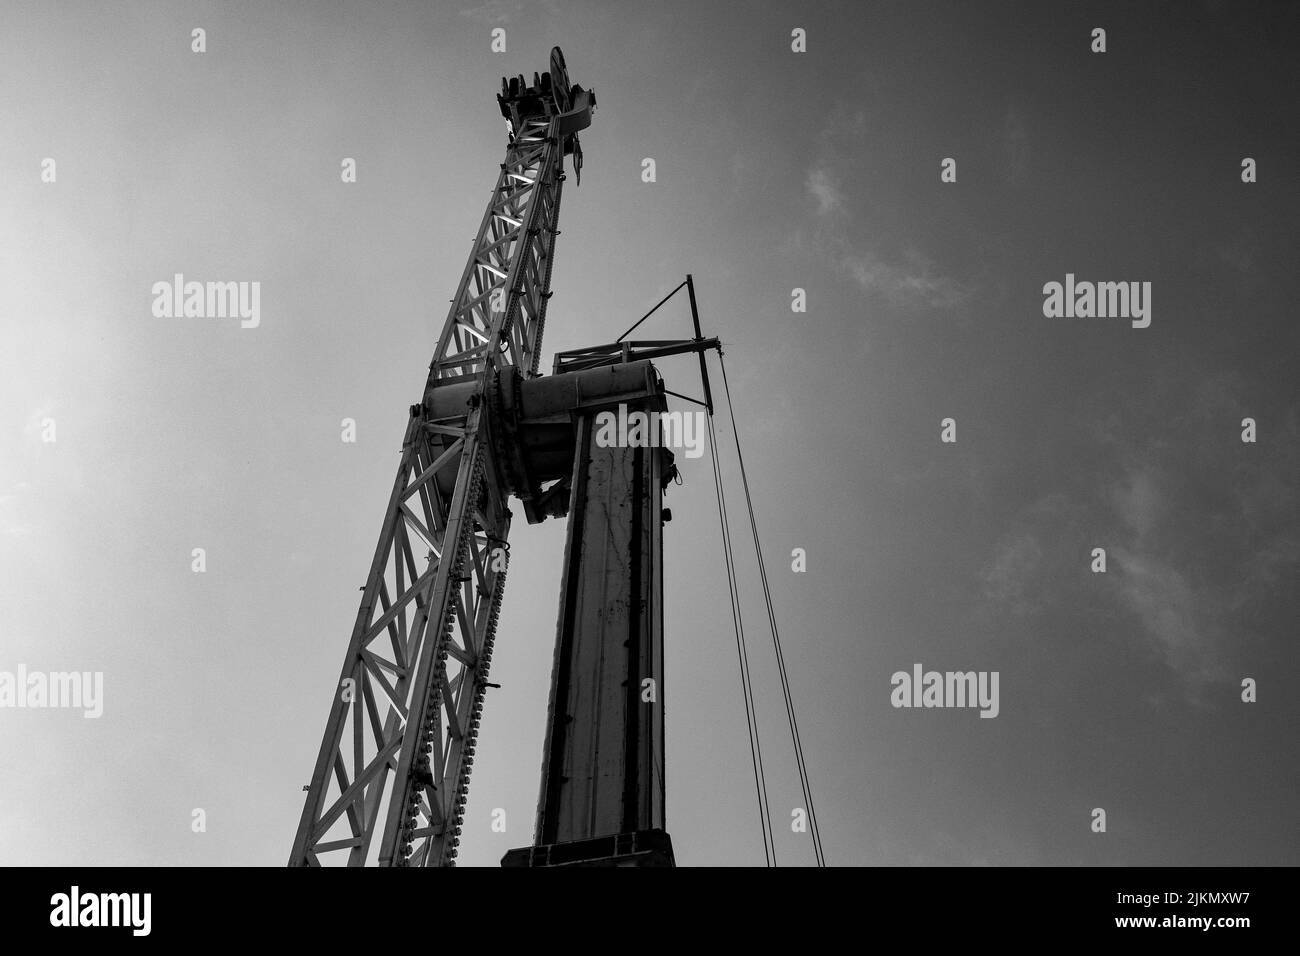 A low angle shot of a Pile driver on the pier in a grayscale Stock Photo